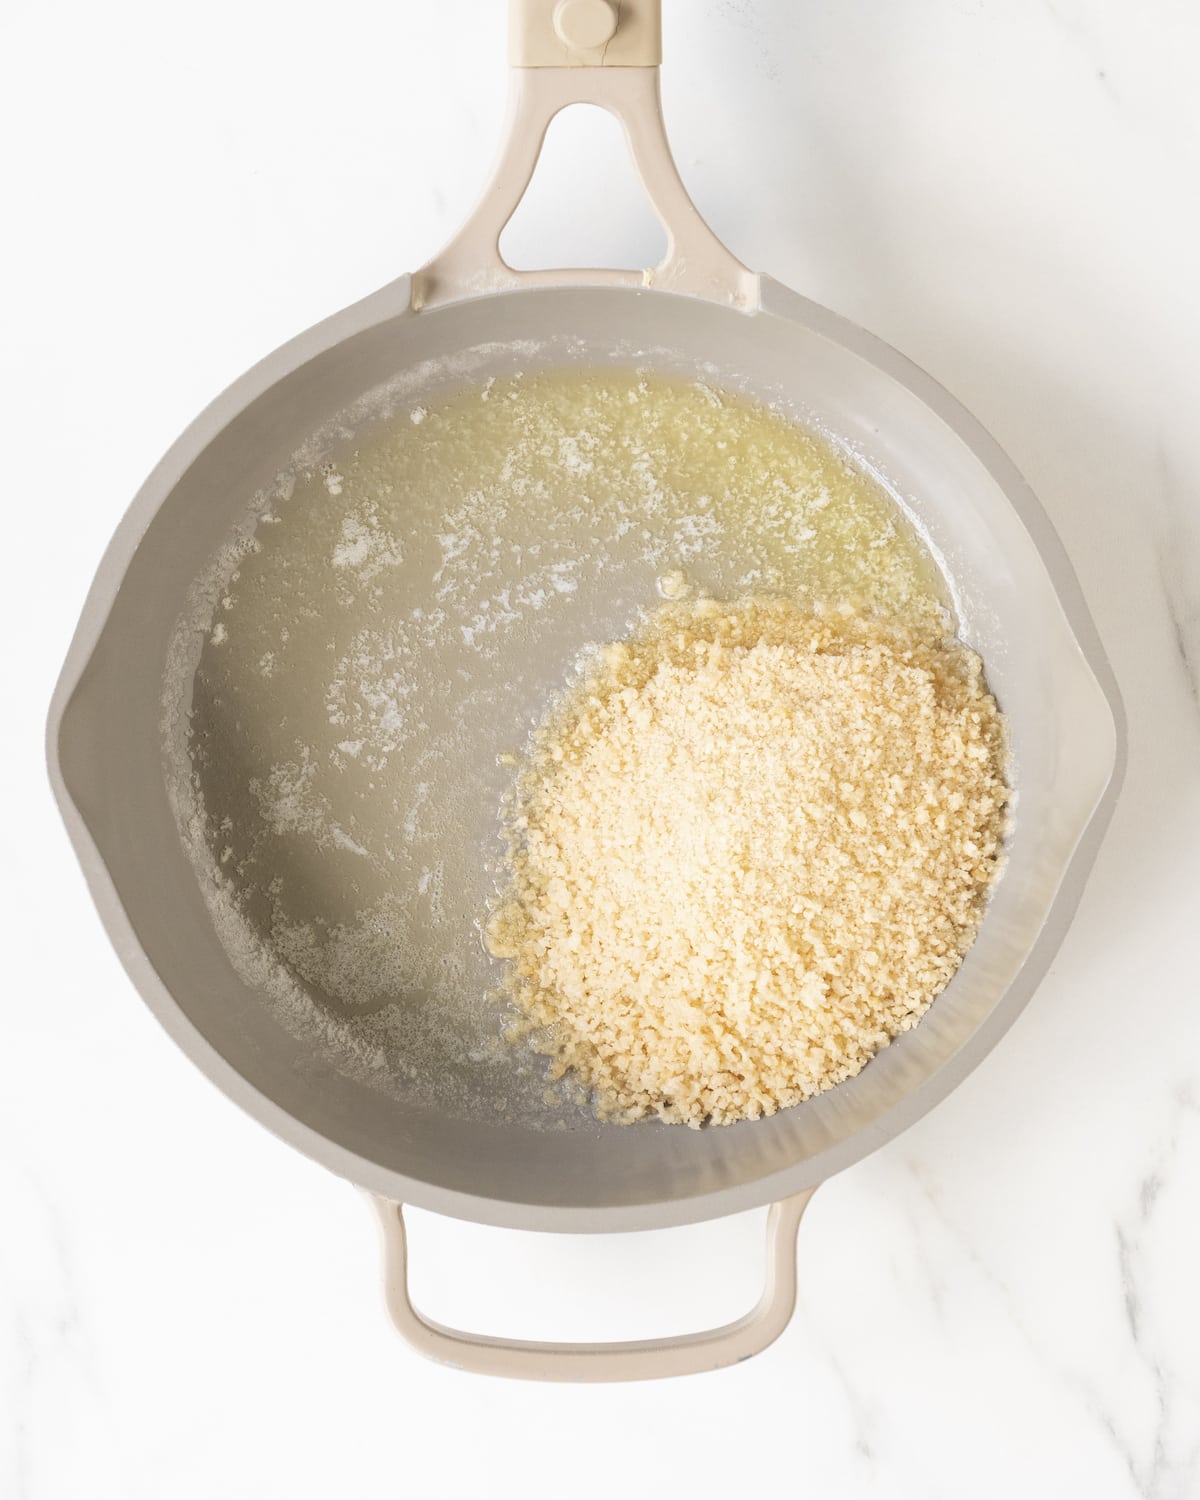 A light pink pan of butter and panko breadcrumbs on a white marbled countertop